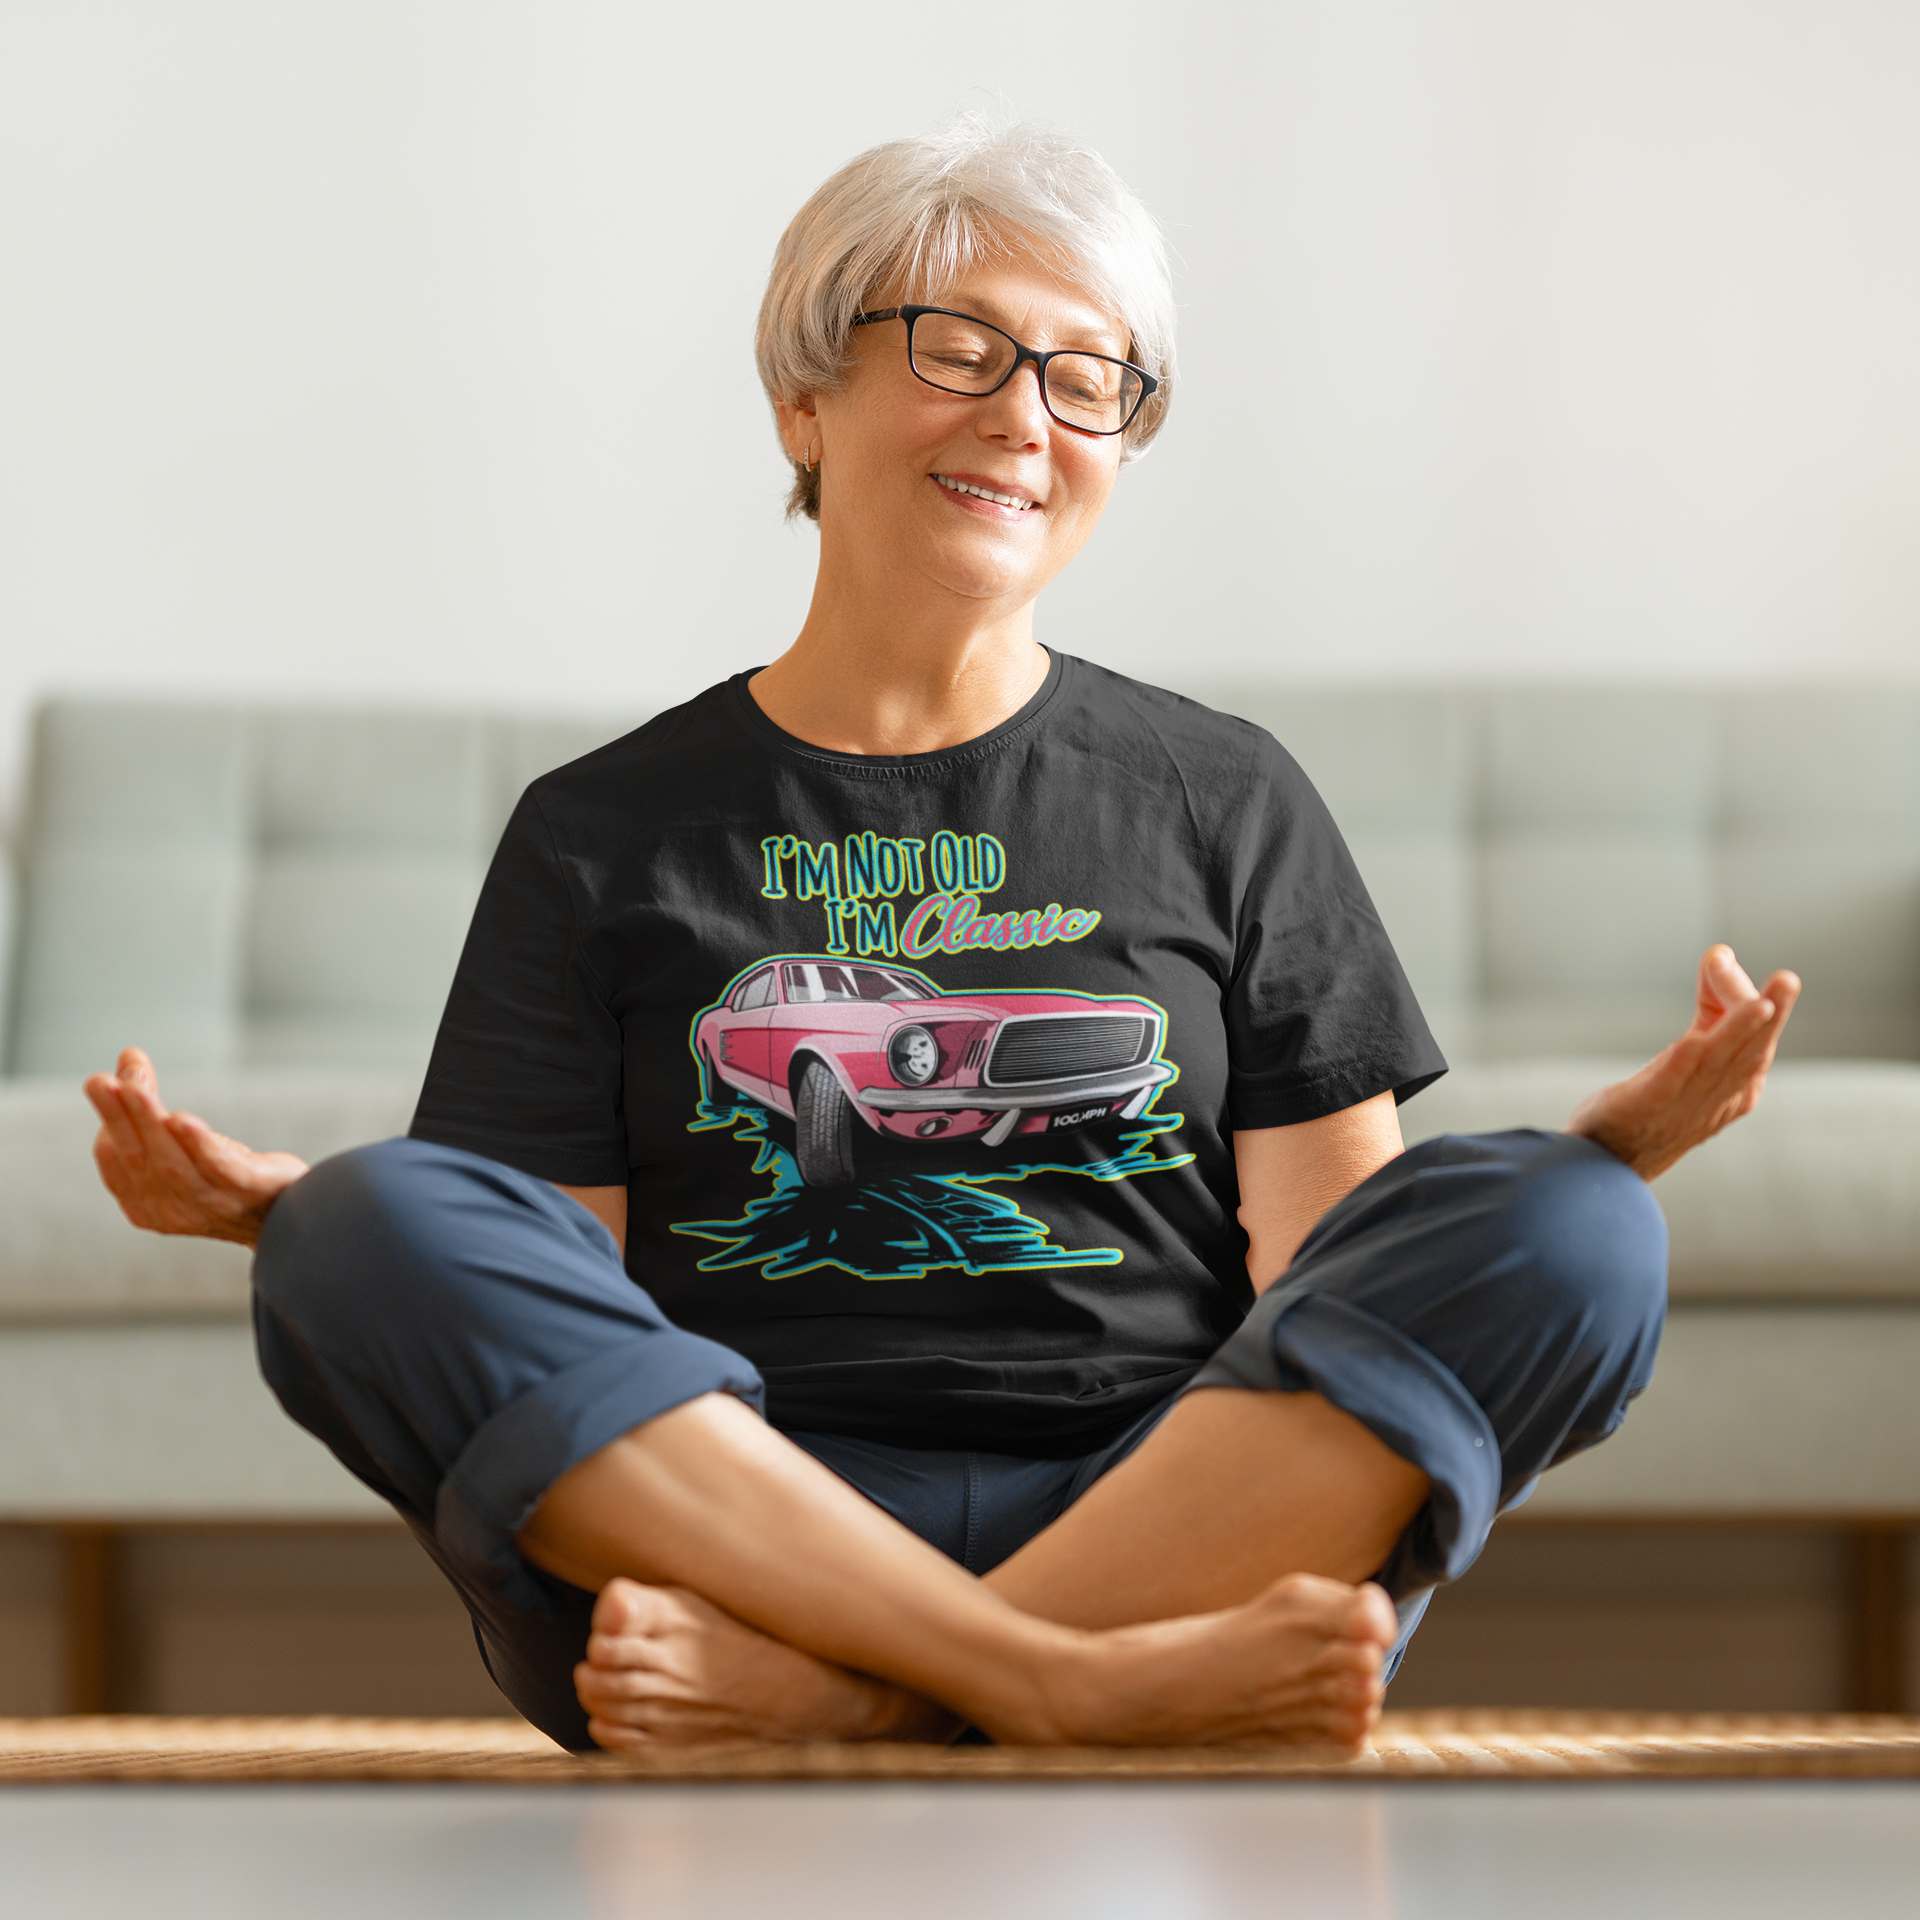 A middle age woman practicing yoga while wearing a tee shirt with an image of a Ford Mustang, and text reading "I'm not old, I'm Classic"